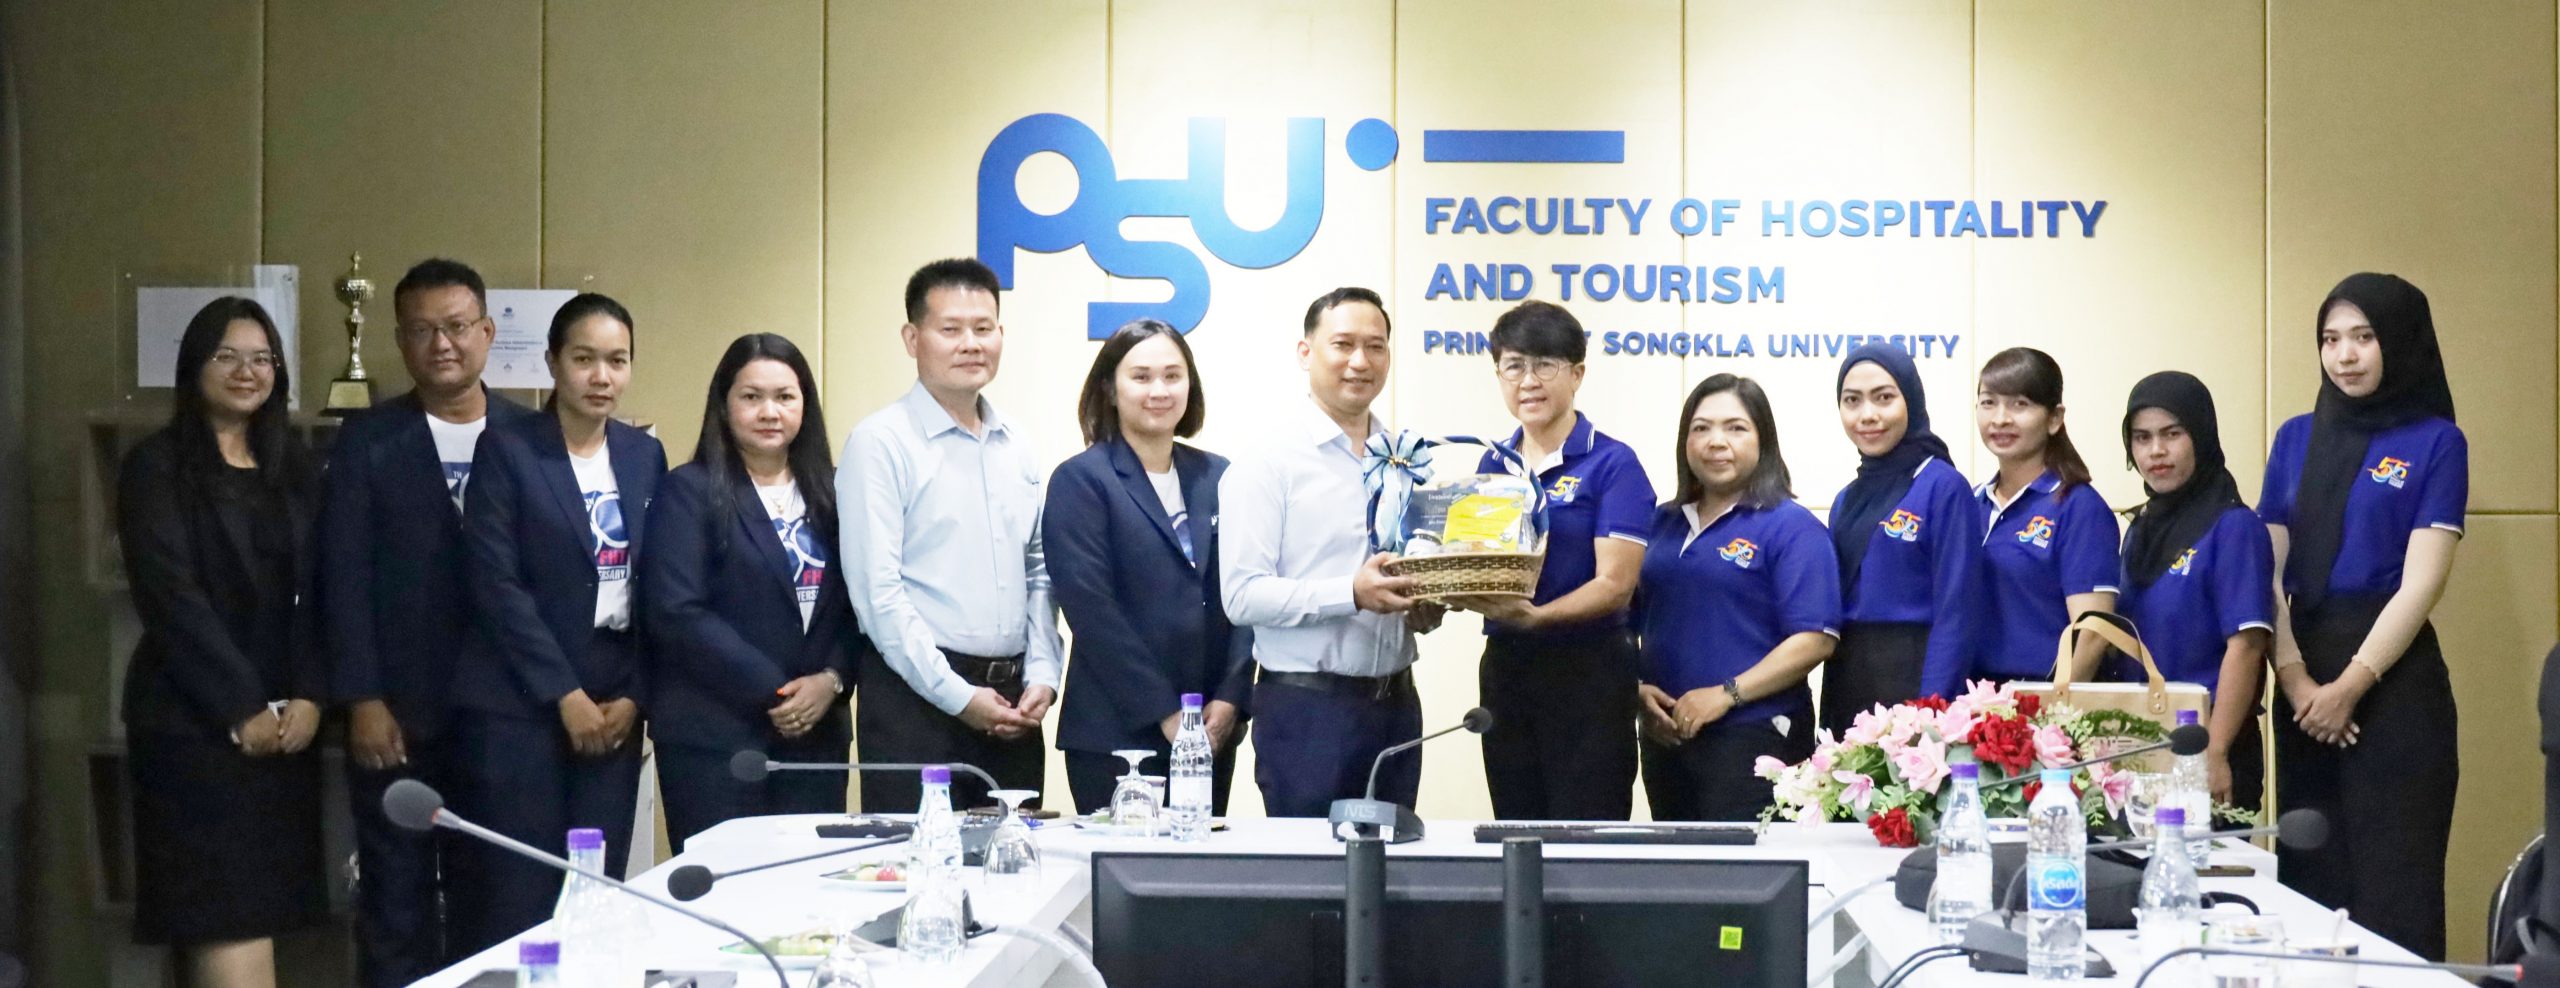 Featured image for “Welcome the delegates from the Asset Center of Prince of Songkla University, Pattani Campus.”